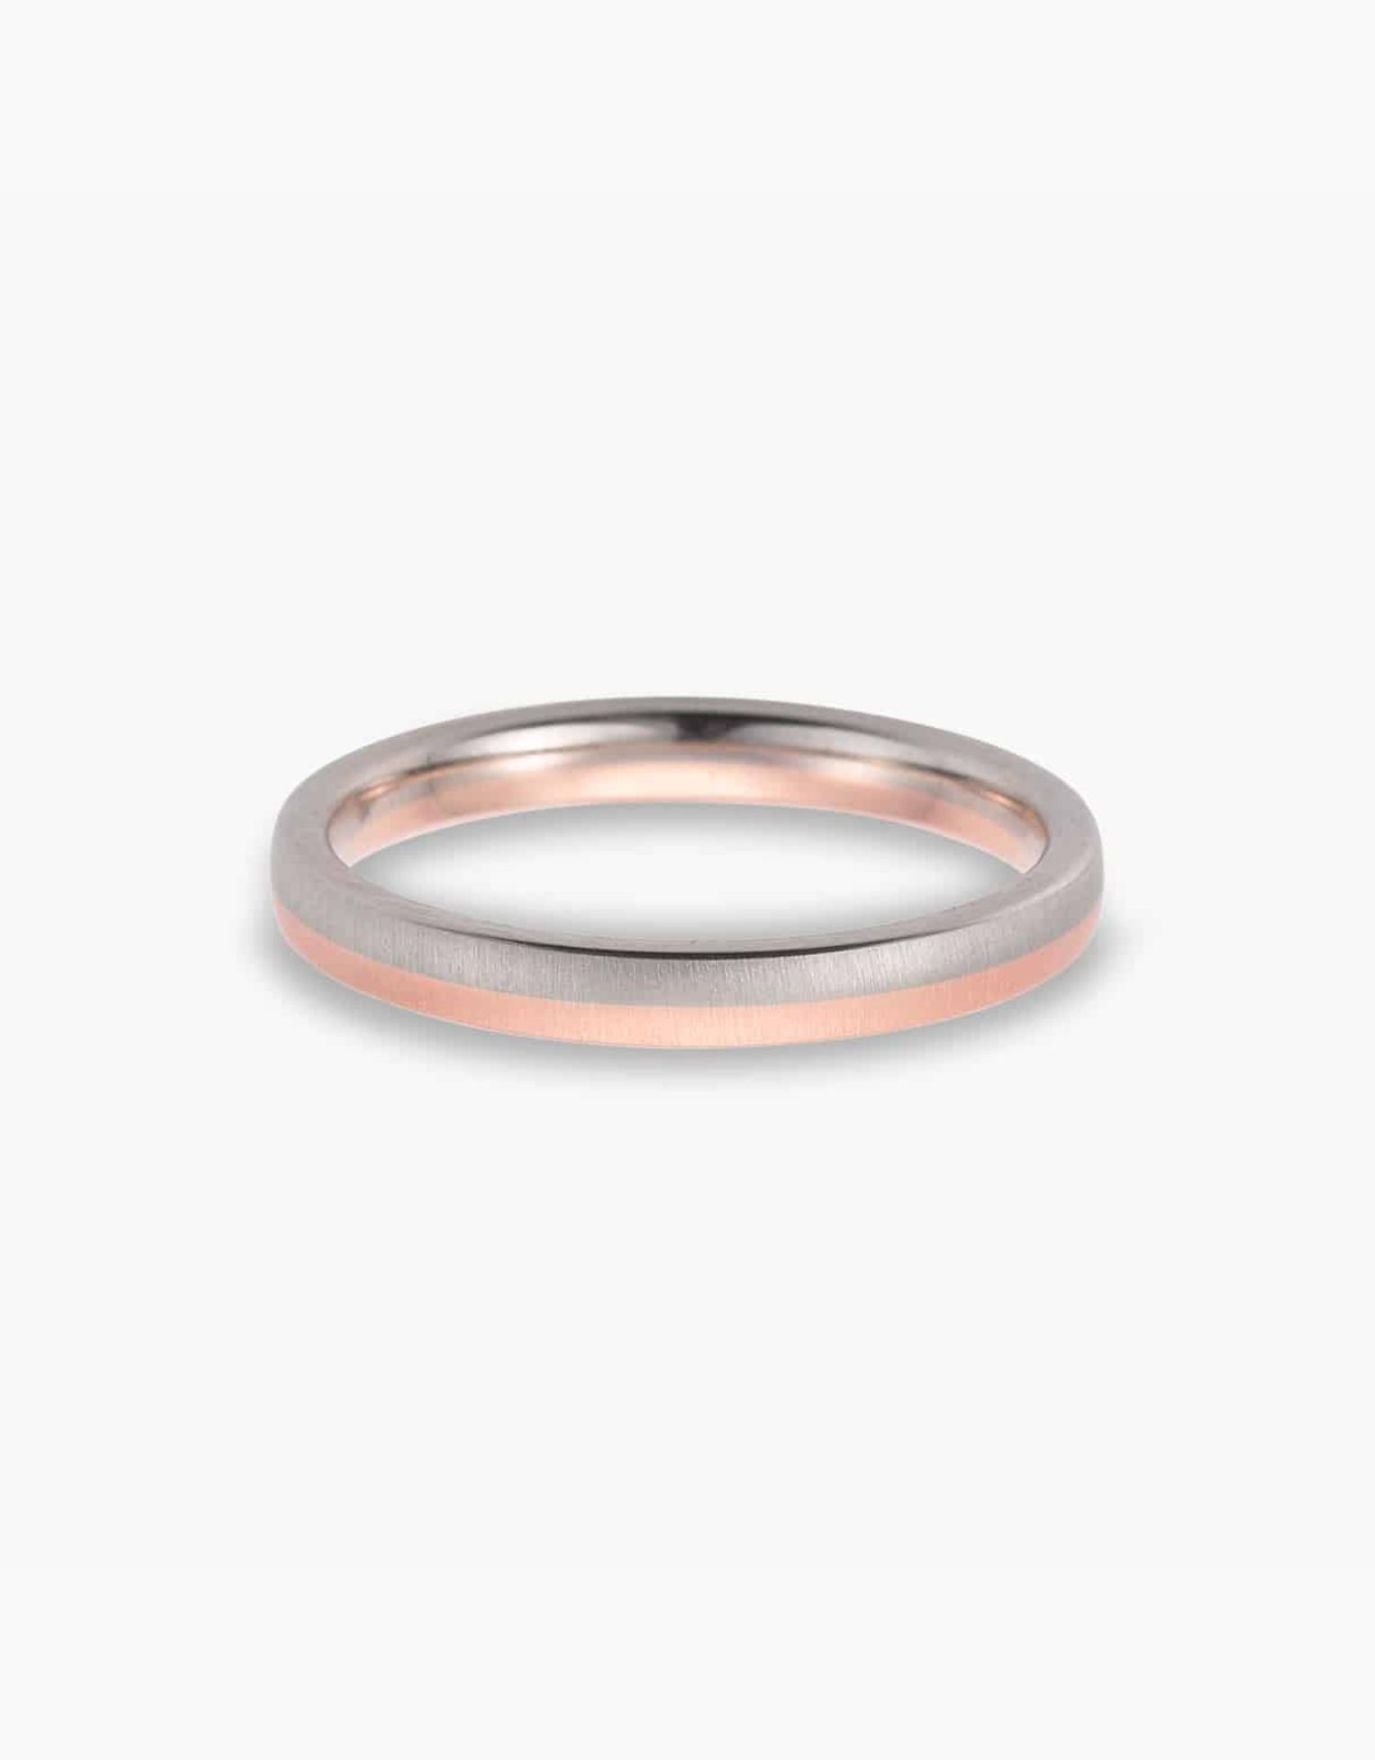 LVC Soleil Mirage Wedding Band in Dual Gold Tones